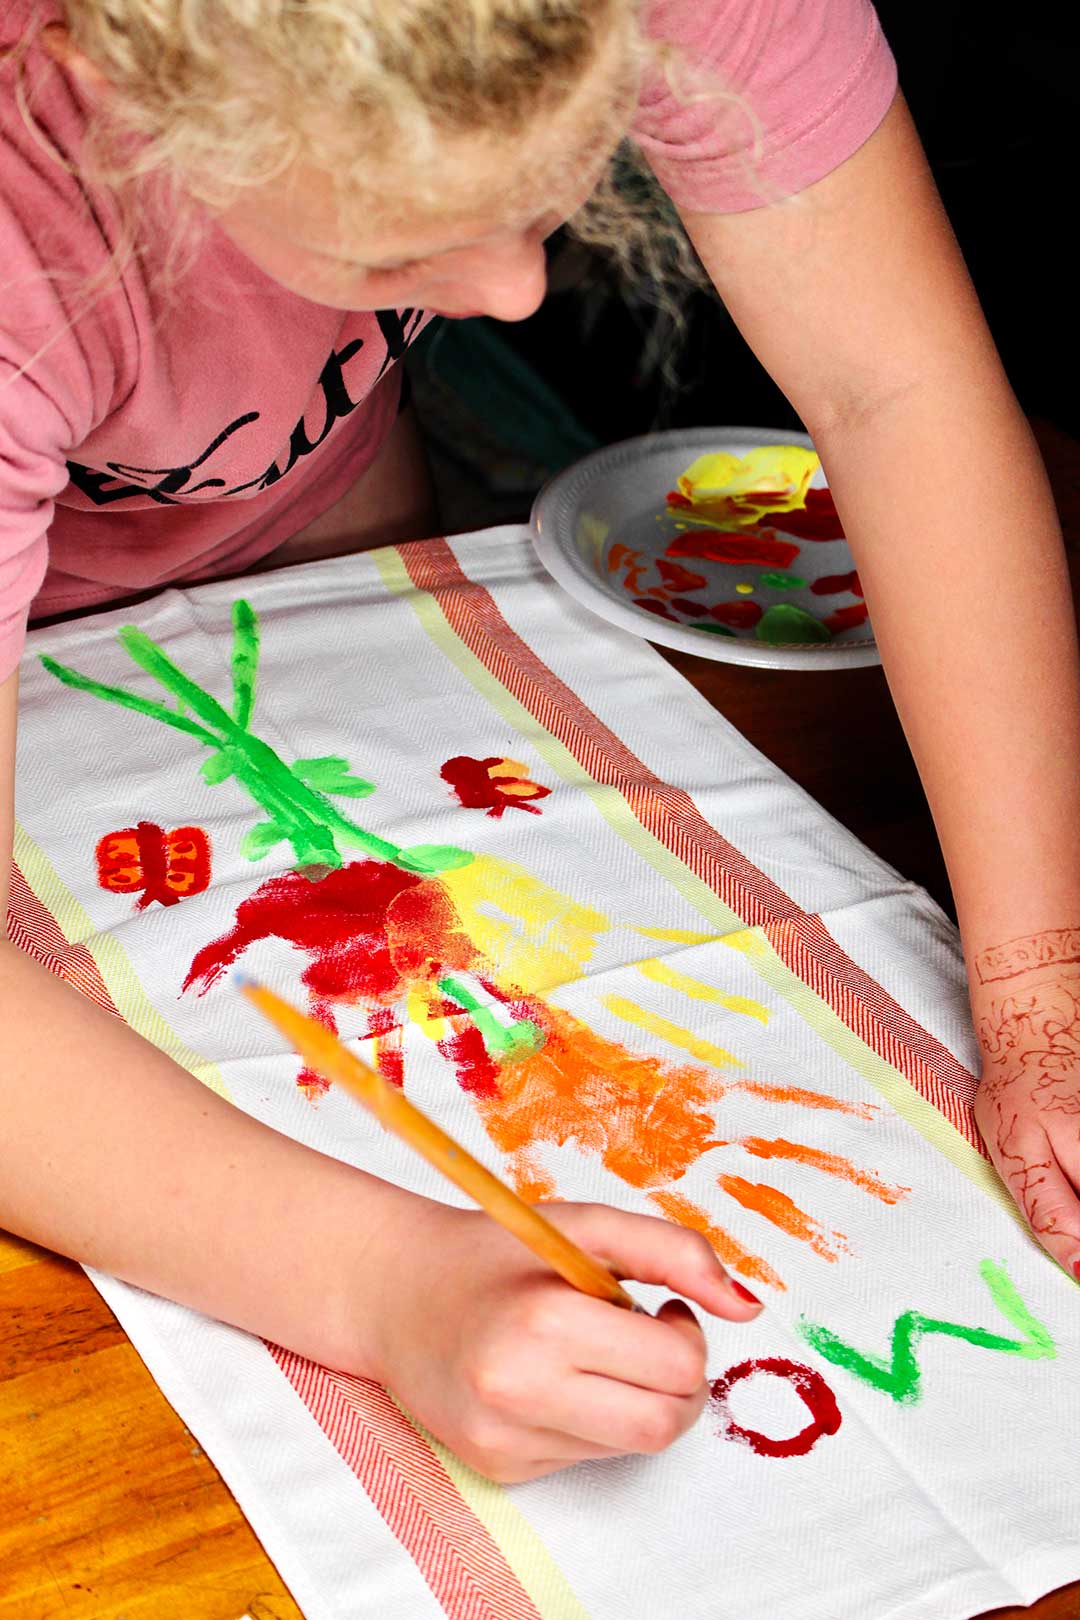 A child painting the word "Mom" on a handprint flower dish towel.